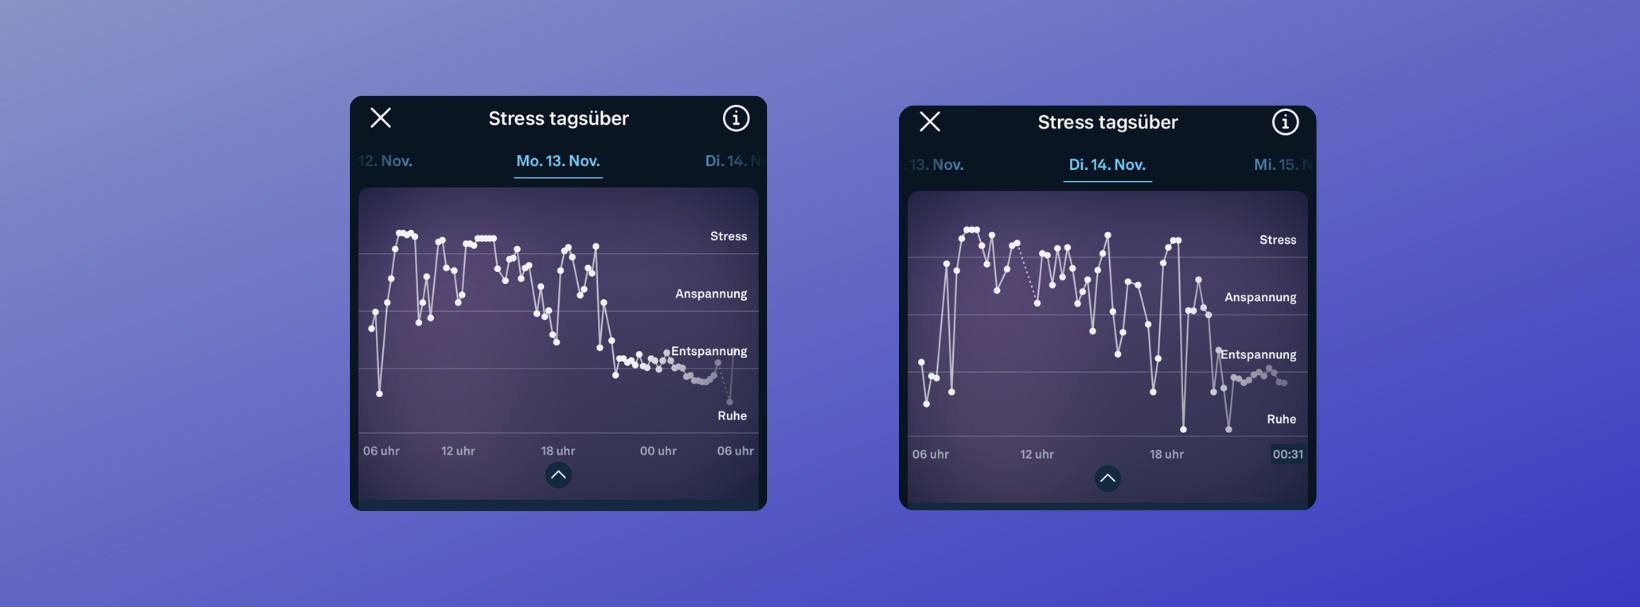 Daytime Stress Charts varying between Elevated and Stressed